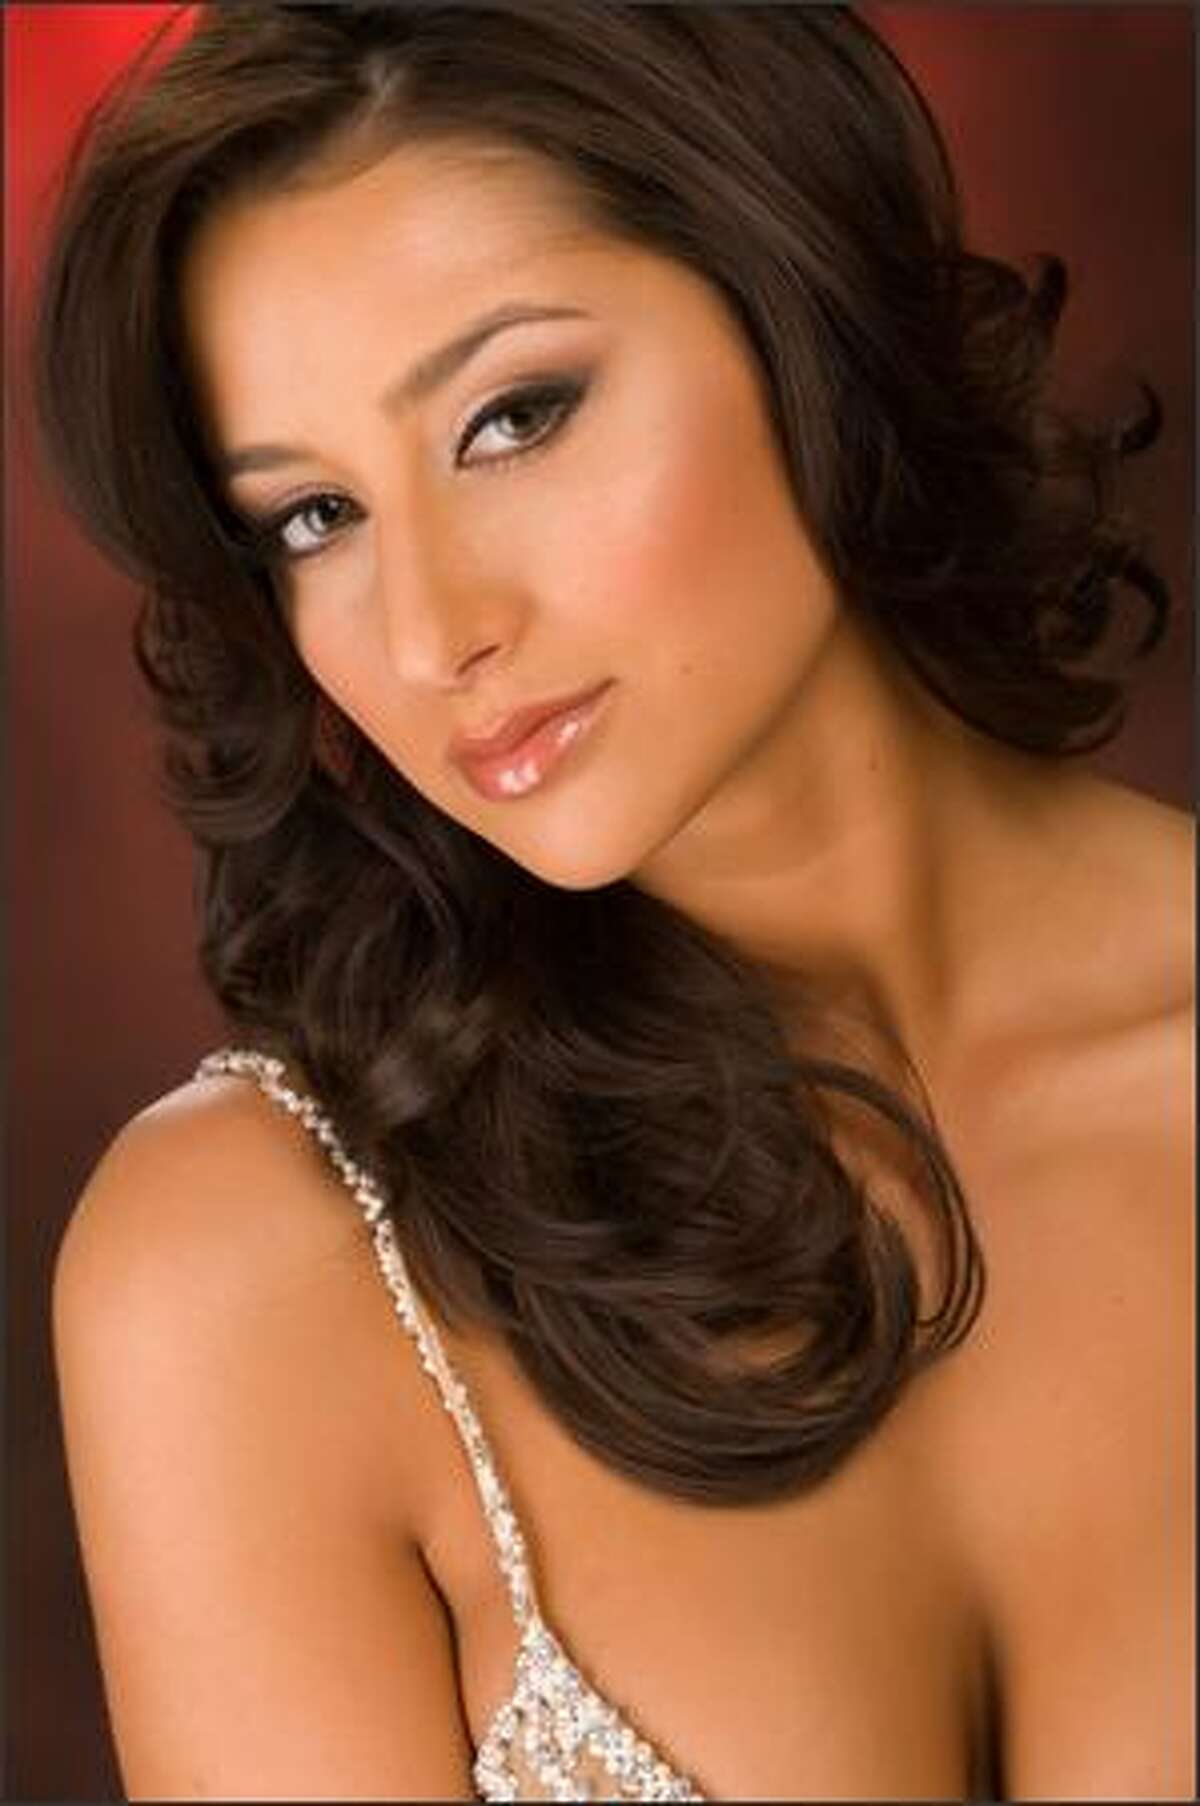 Rachel Philippona, Miss Alabama, poses for a portrait during registration and fittings for the Miss USA competition at the Planet Hollywood Resort and Casino in Las Vegas on April 4. The winner will be crowned April 19. The Miss Universe Organization, which operates the Miss USA pageant, advises that these portraits are retouched.